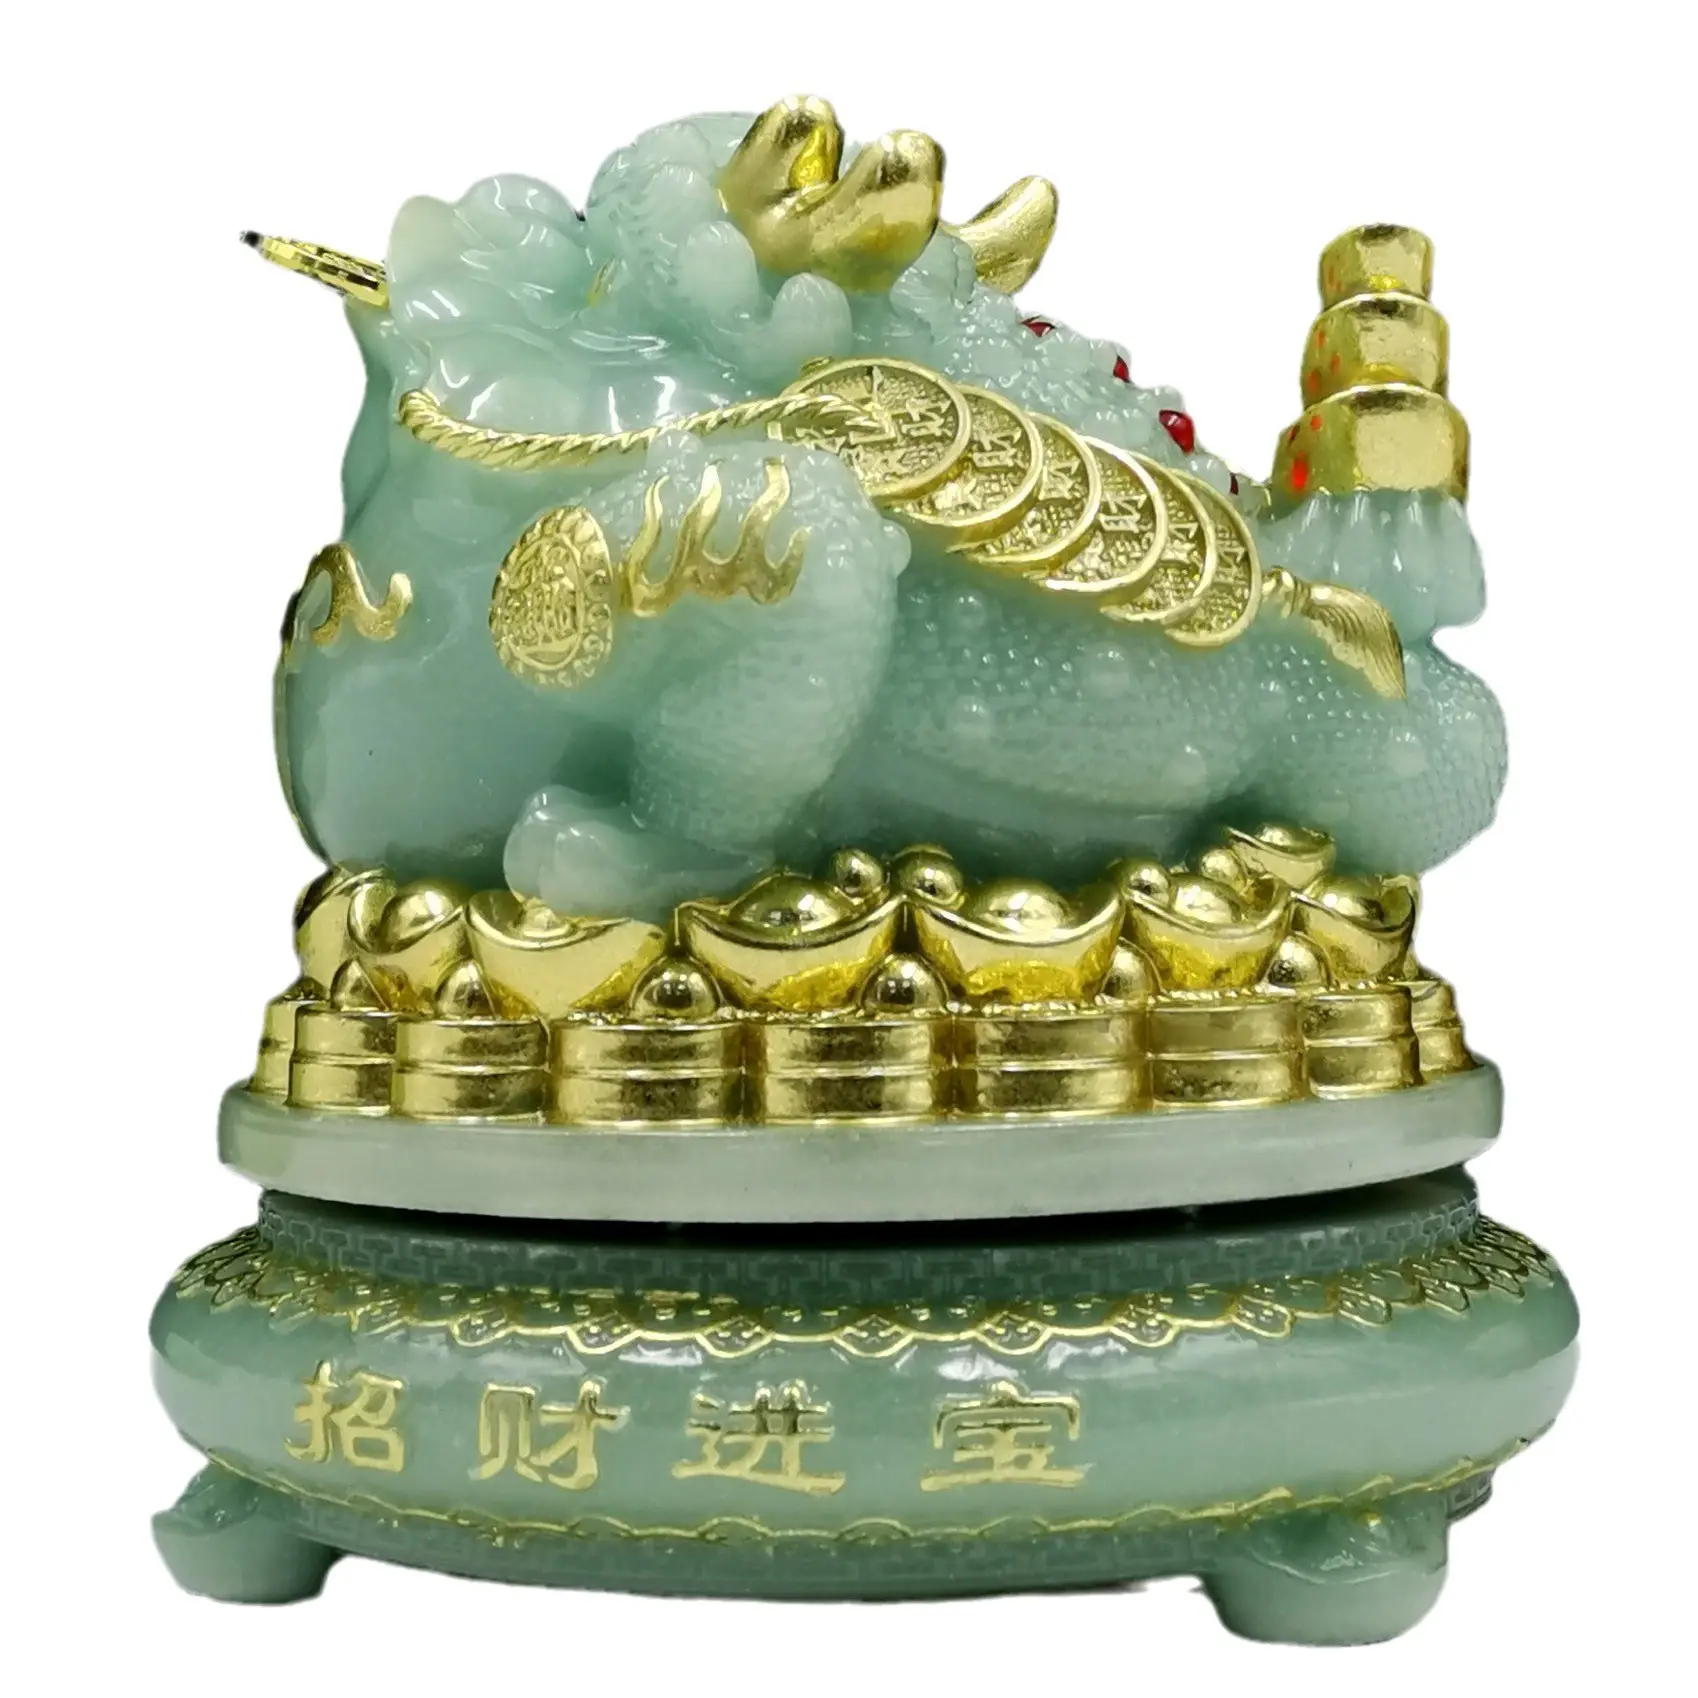 2023 Decor Money Frog And Toad Lucky Jade Toad For Wealth Golden Toad Feng Shui Resin Crafts Home Decor